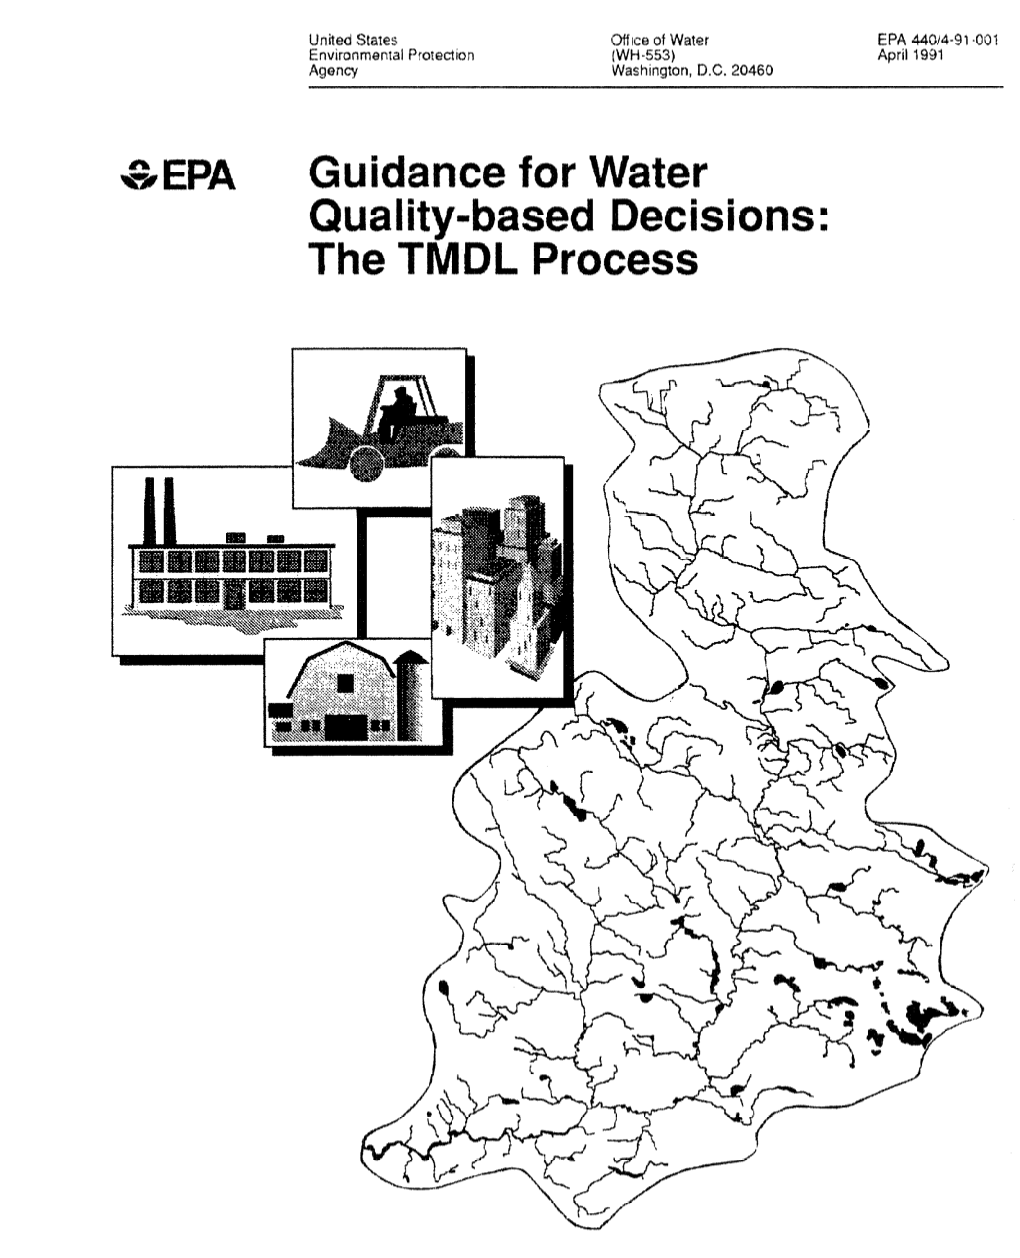 The TMDL Process Guidance for Water Quality-Based Decisions: the TMDL Process